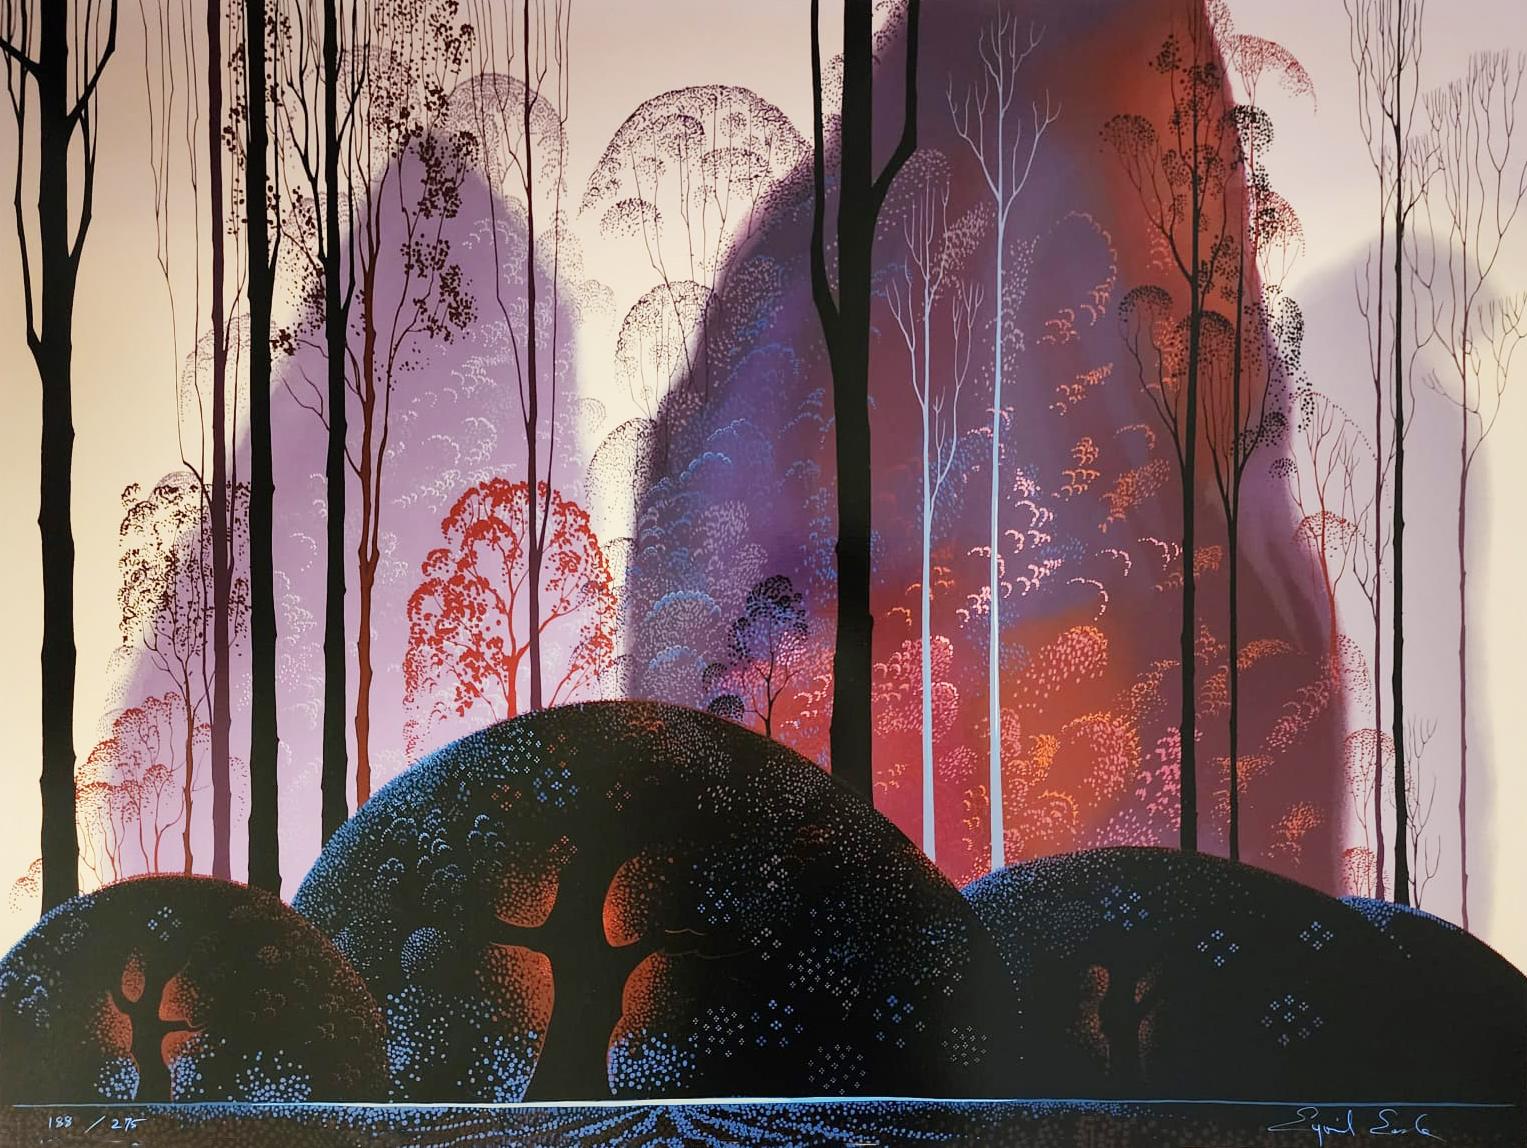 'Mauve, Red and Purple' 1987 - Print by Eyvind Earle